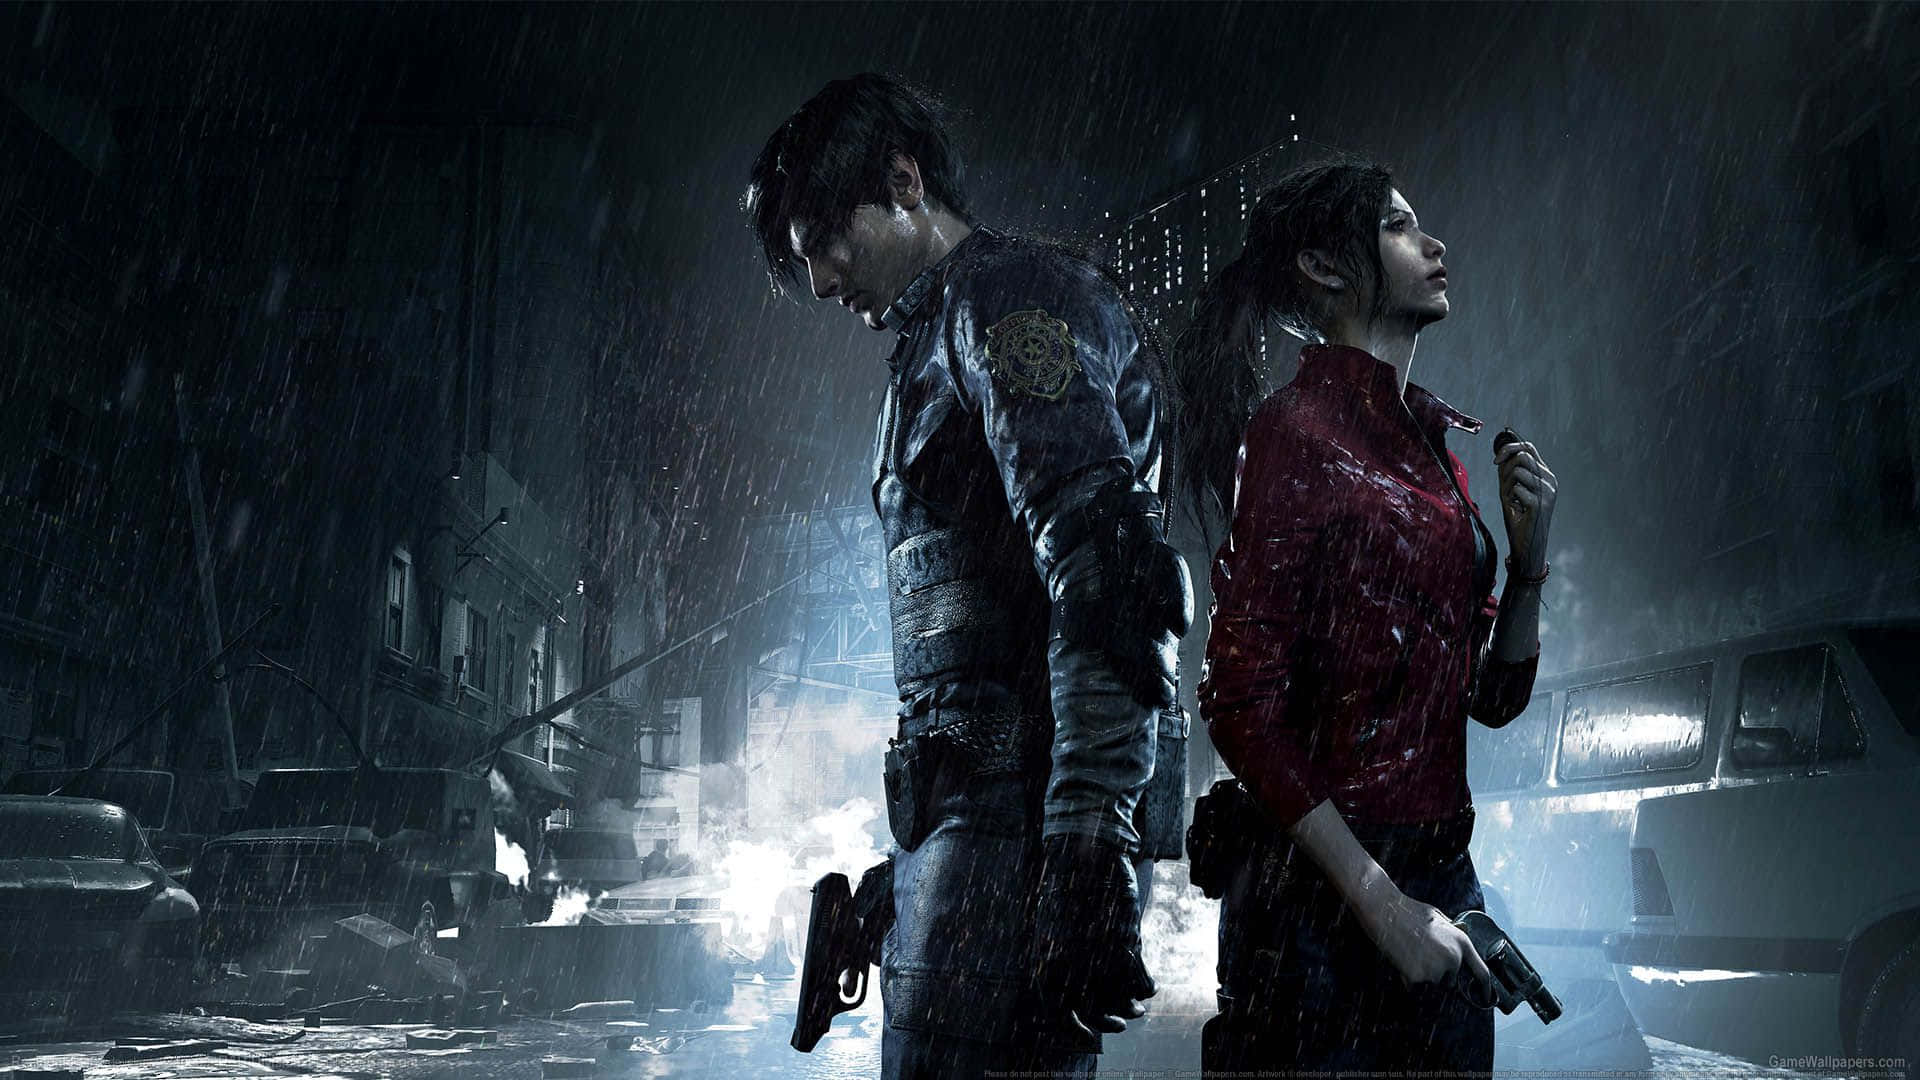 1920x1080 Resident Evil 2 Background Claire And Leon Dark Game Poster